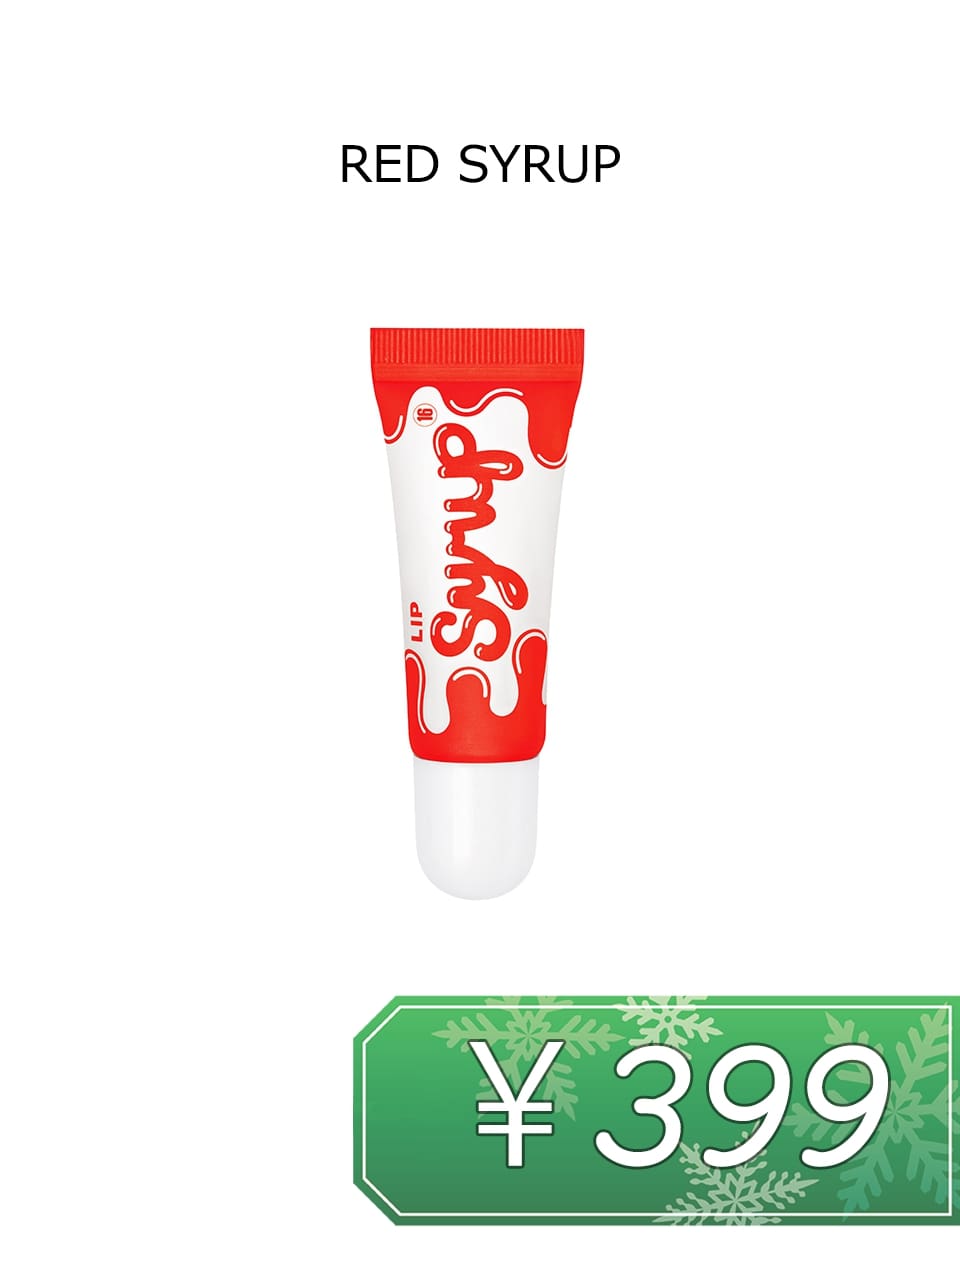 【16brand】LIP SYRUP(RED SYRUP)【1408円⇒《特価》399円】